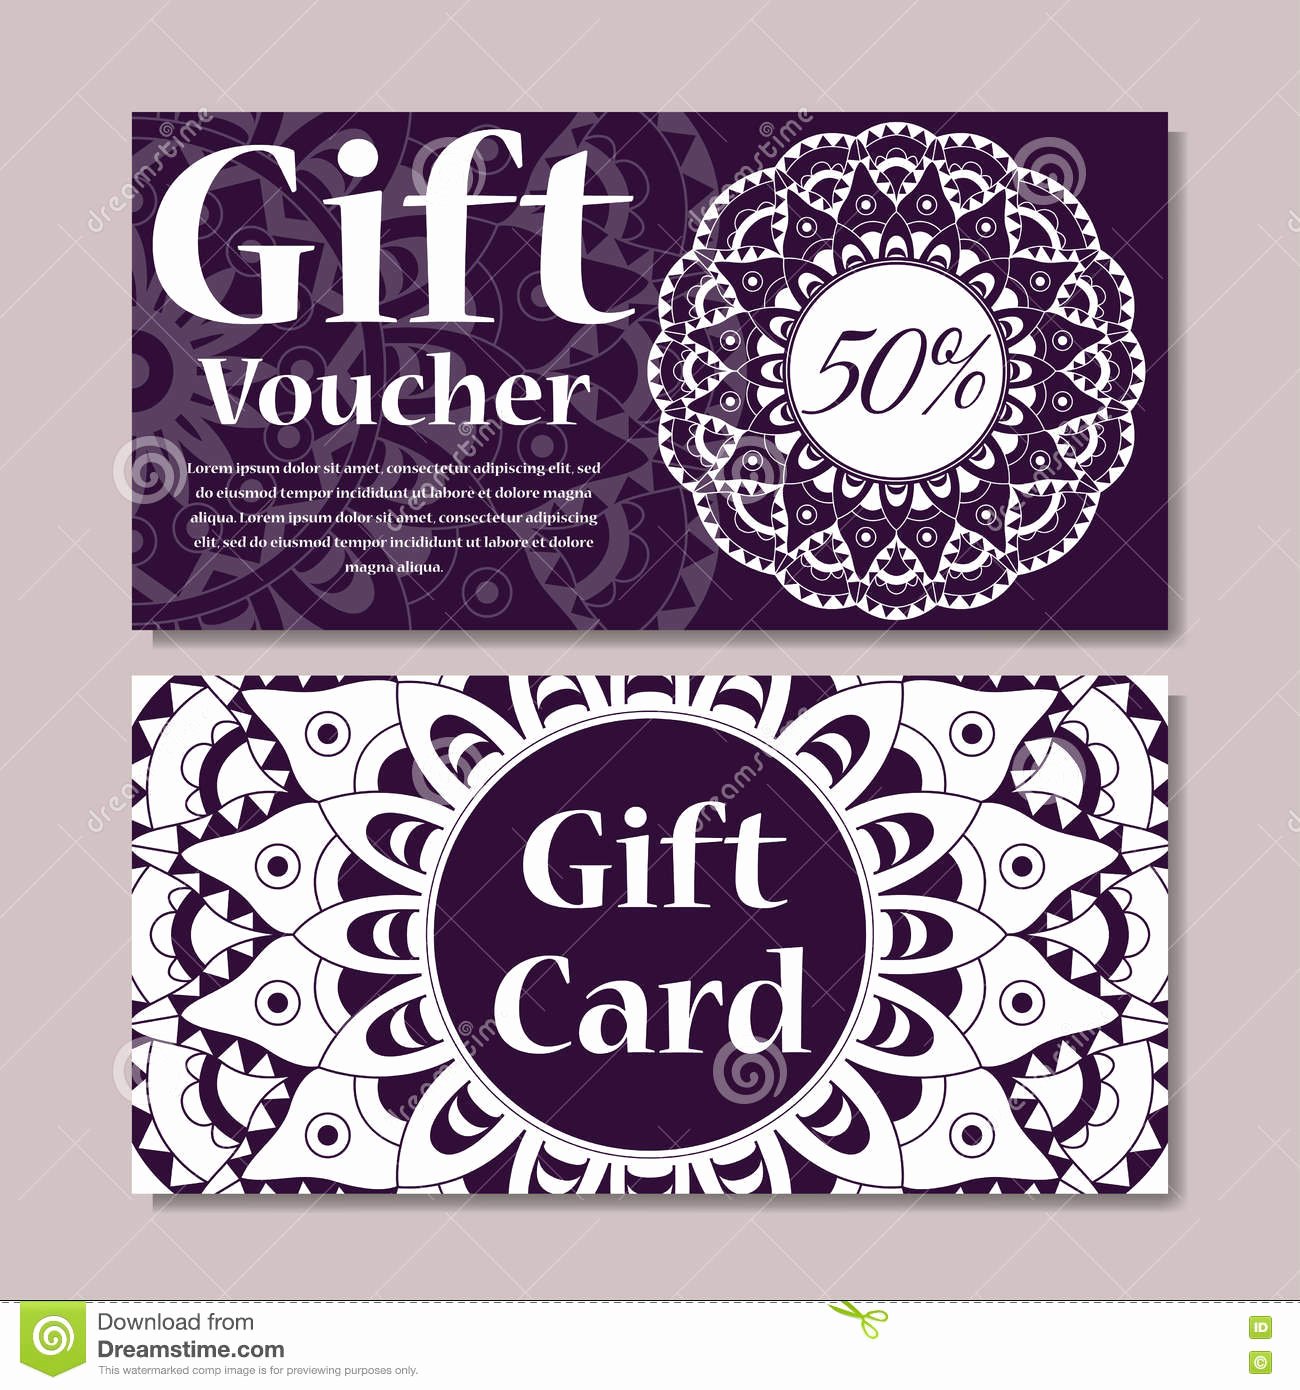 Yoga Gift Certificate Template Lovely Gift Voucher Template with Mandala Design Certificate for